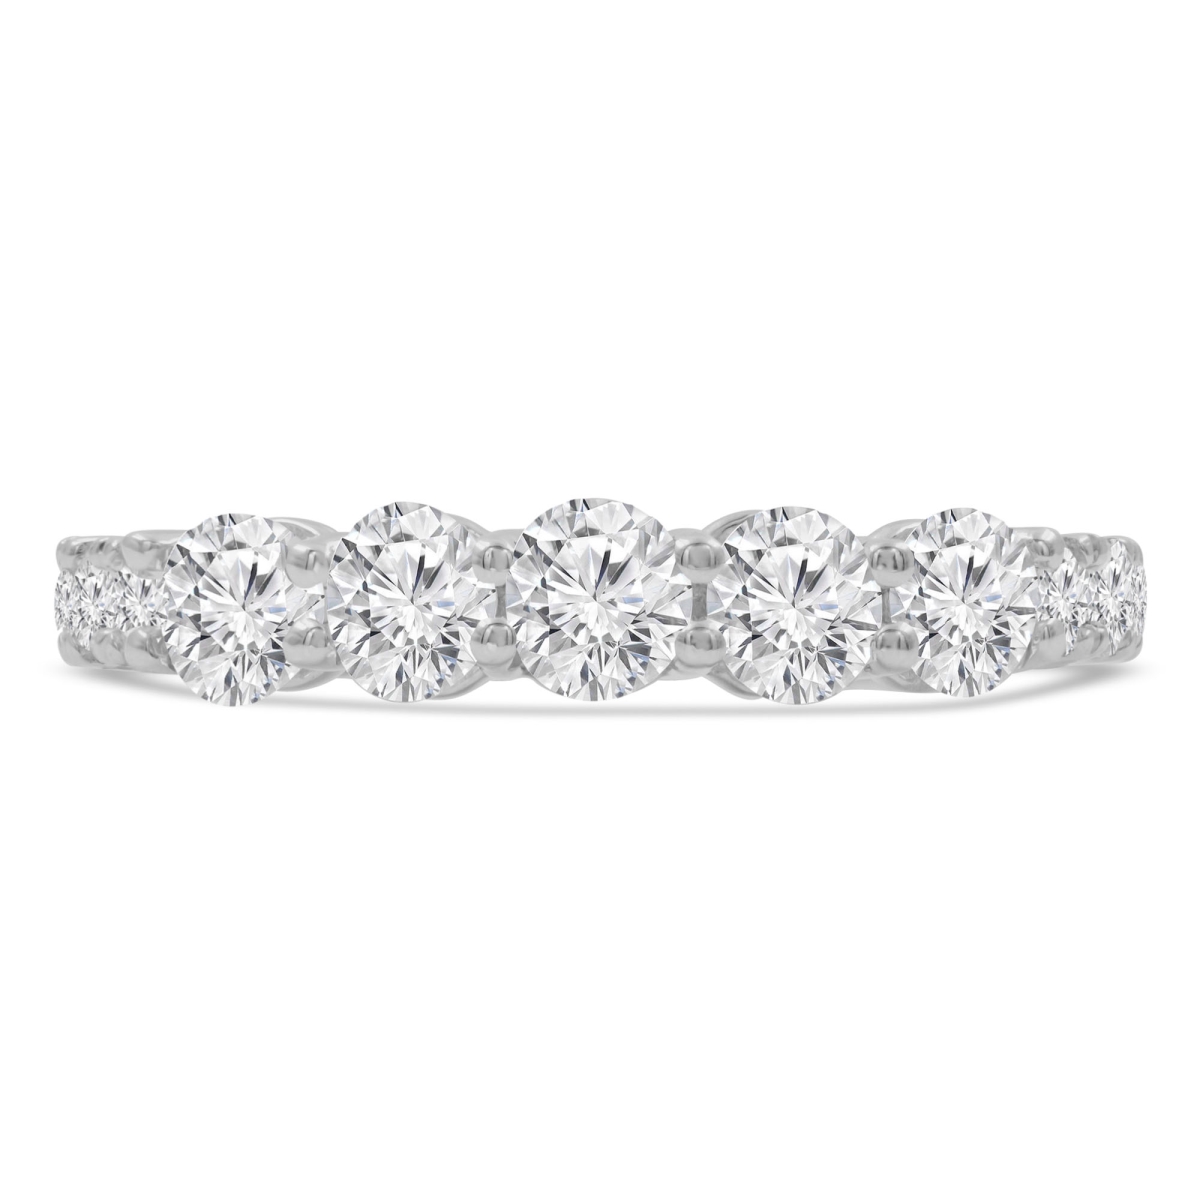 Picture of Majesty Diamonds MD210372-P 1.4 CTW Round Diamond Five-Stone Ring with Accents in 14K White Gold